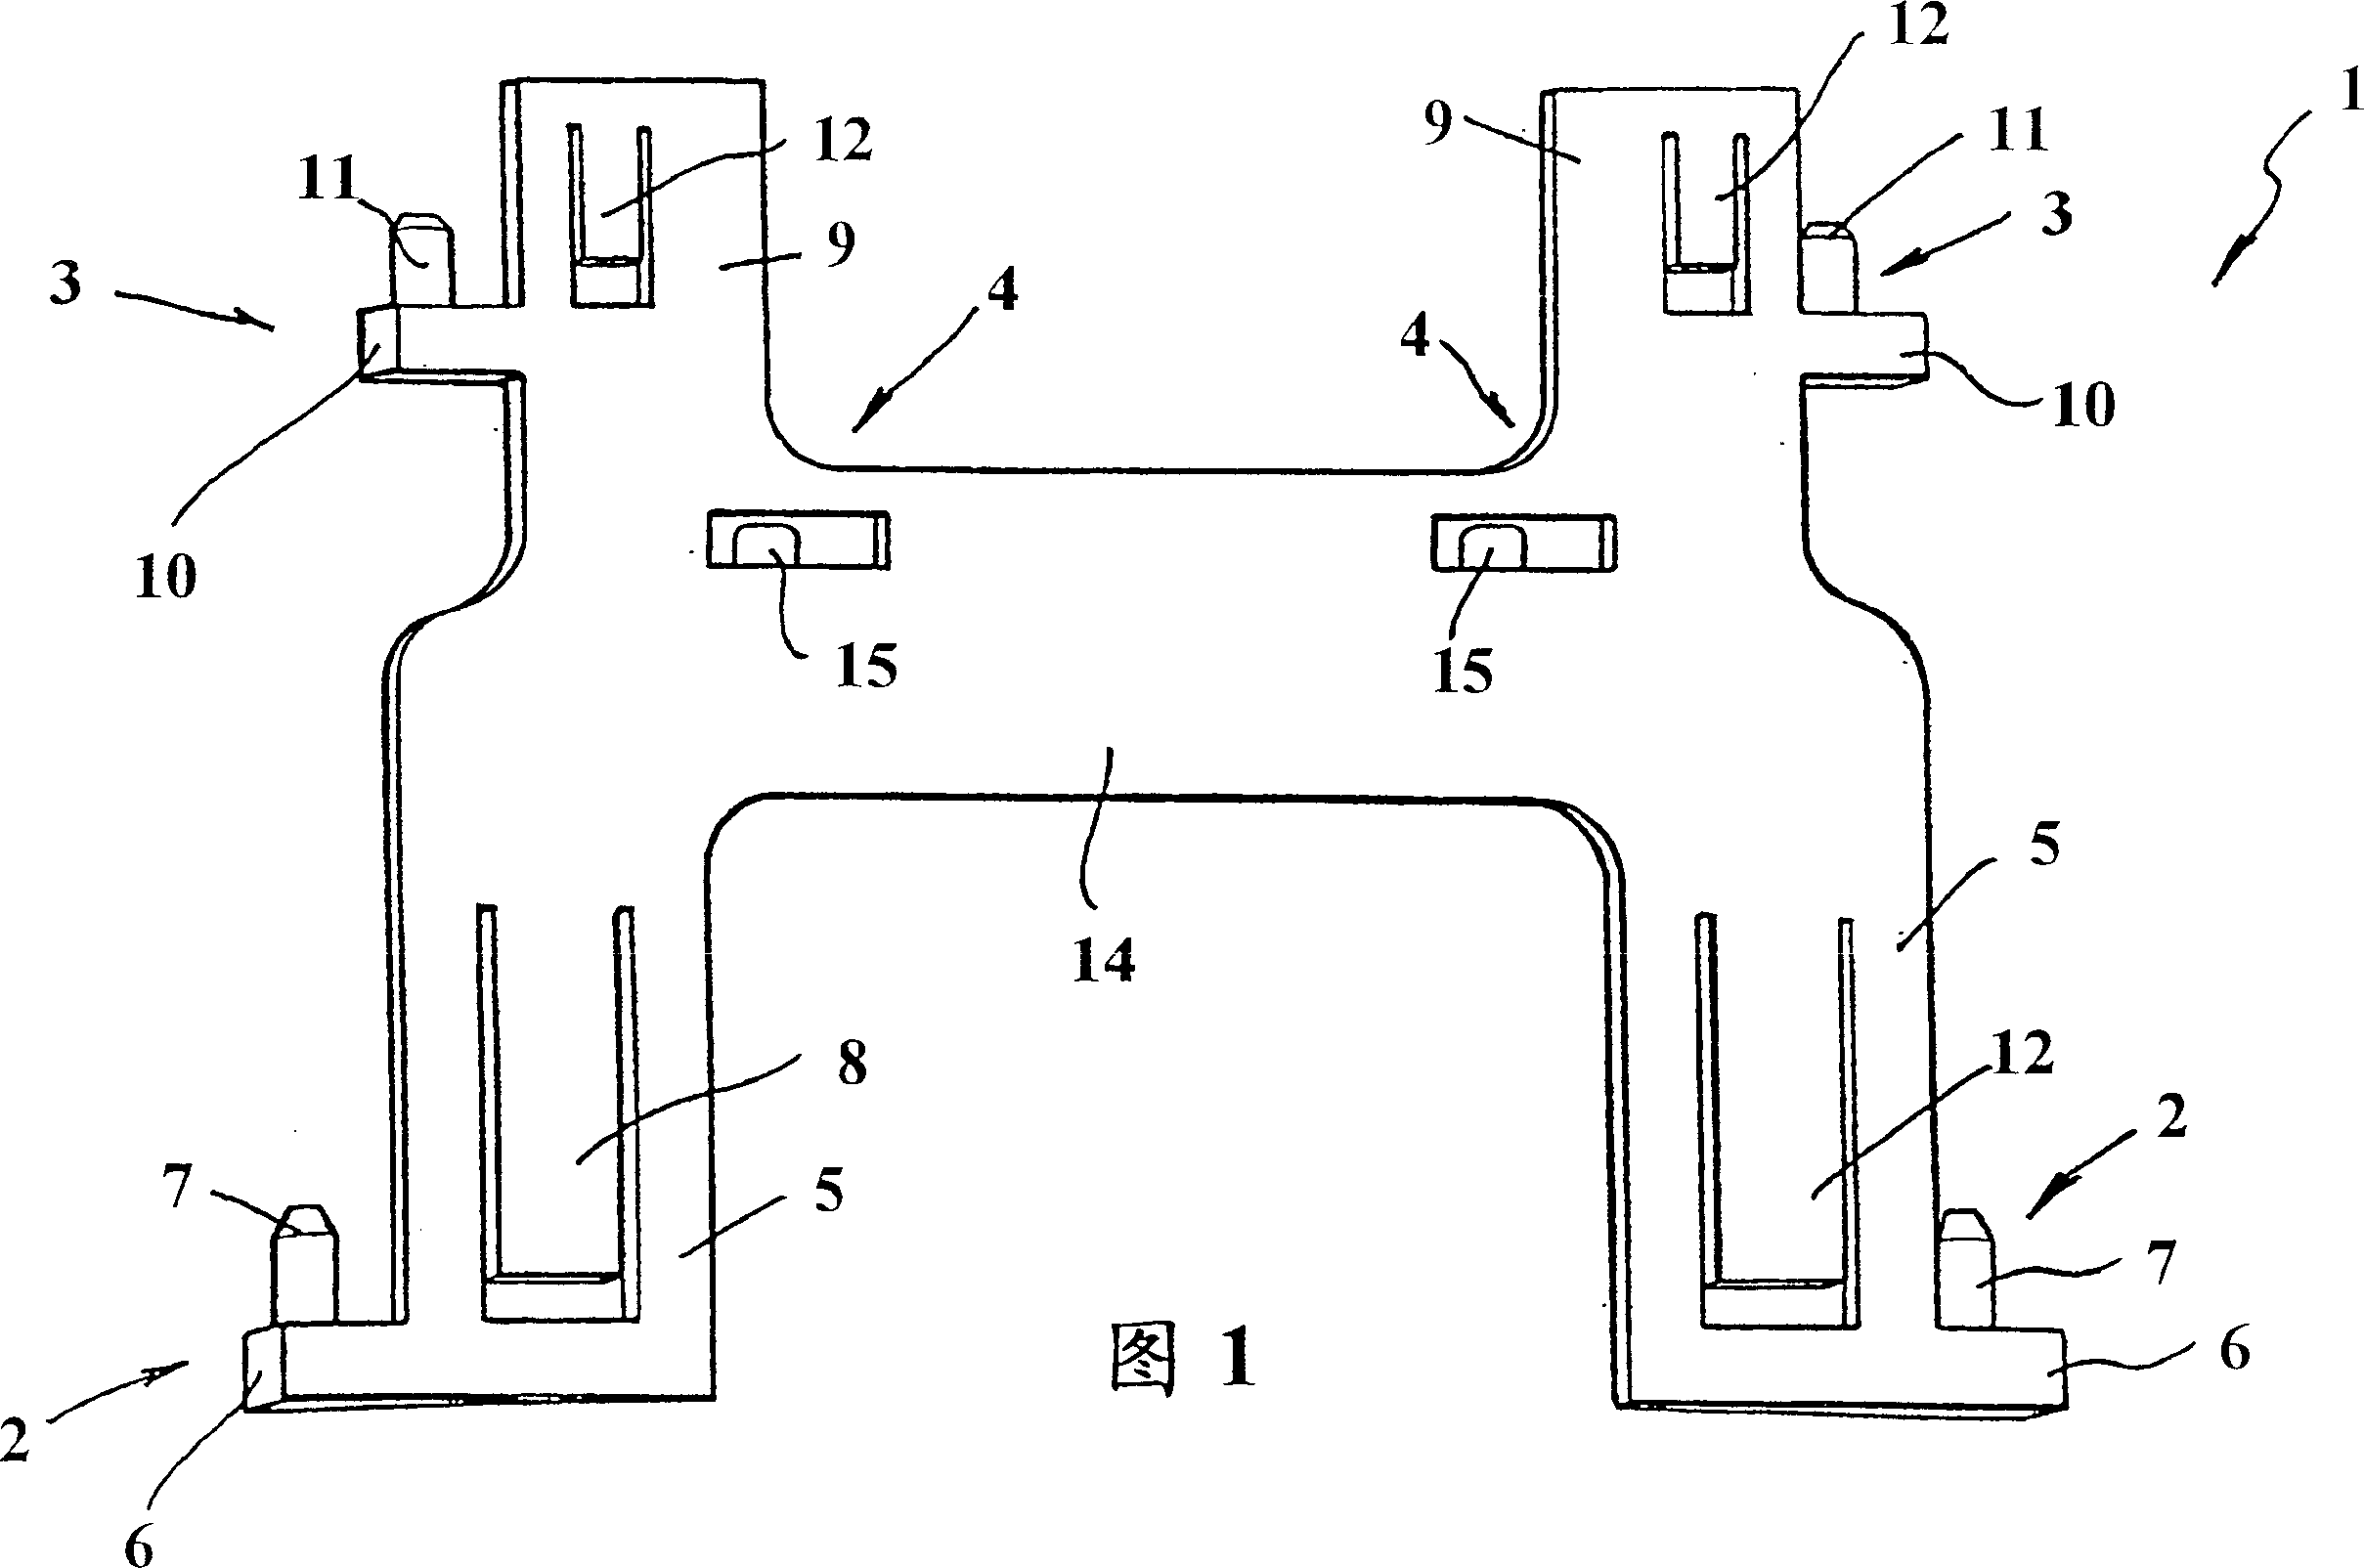 Printed circuit board assembly device